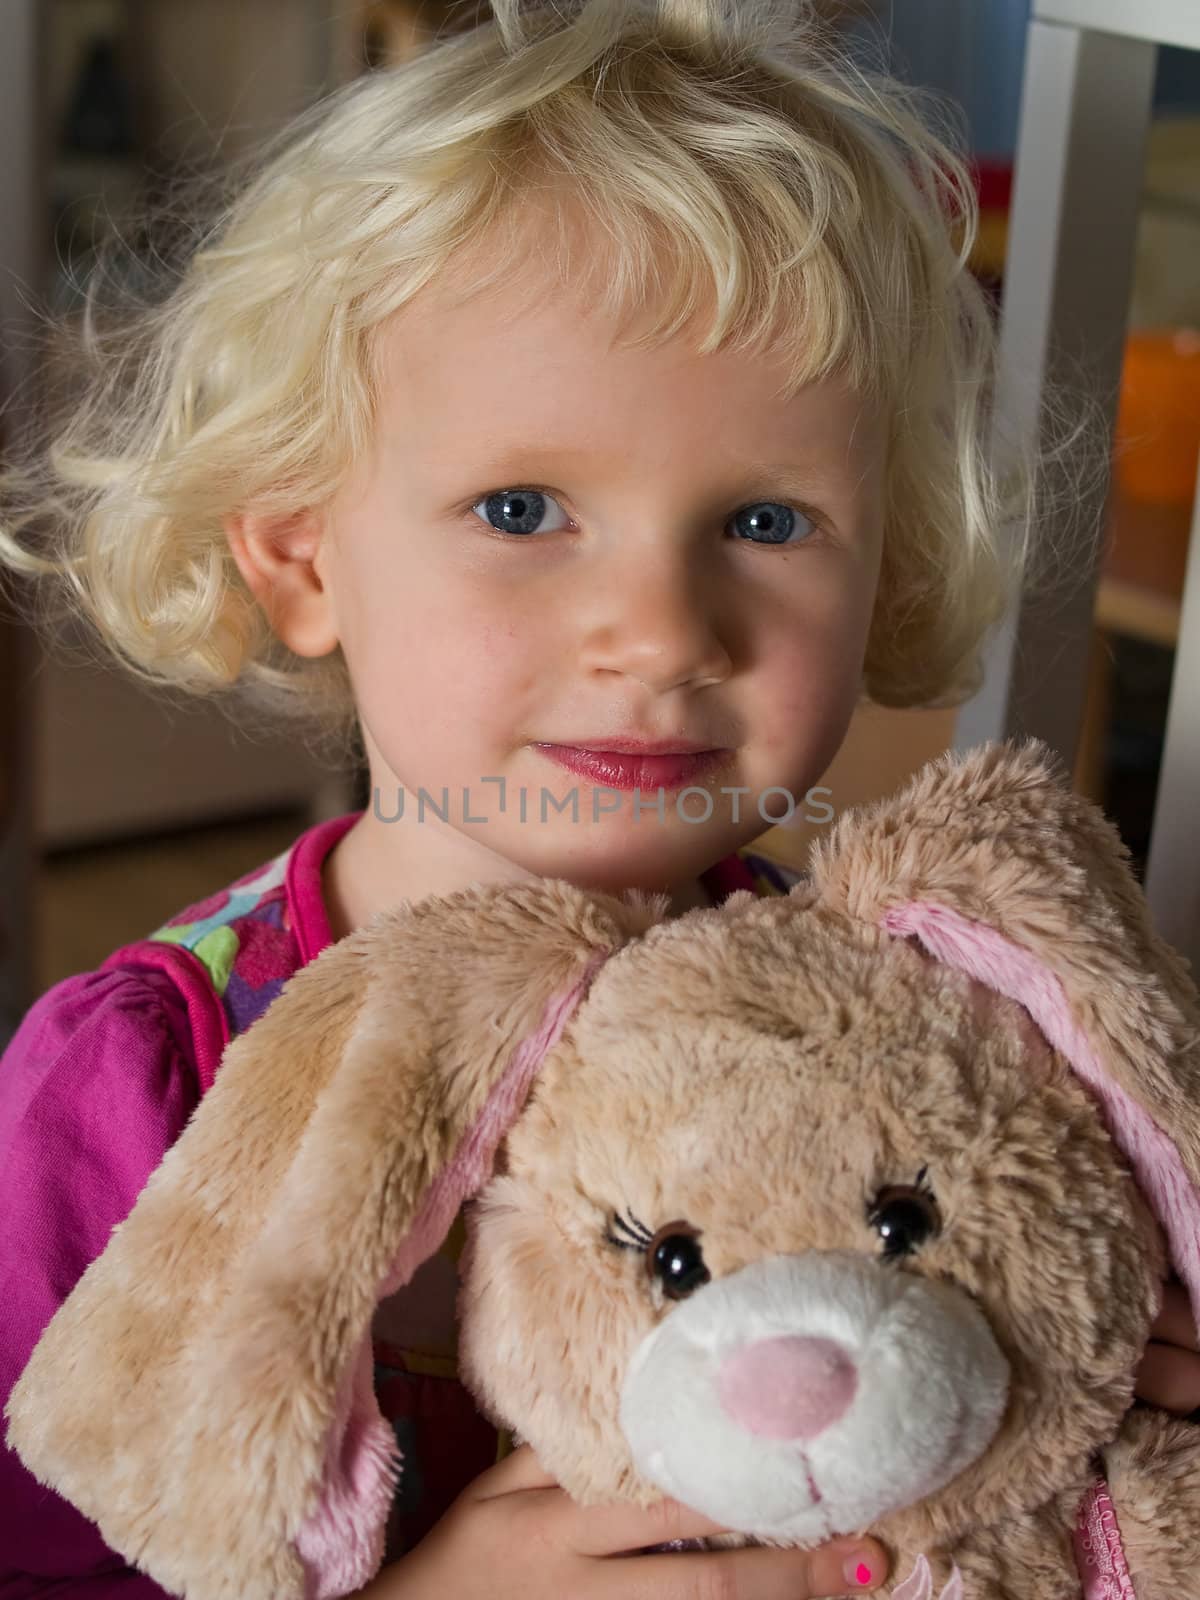 Little girl with teddy bear by Ronyzmbow